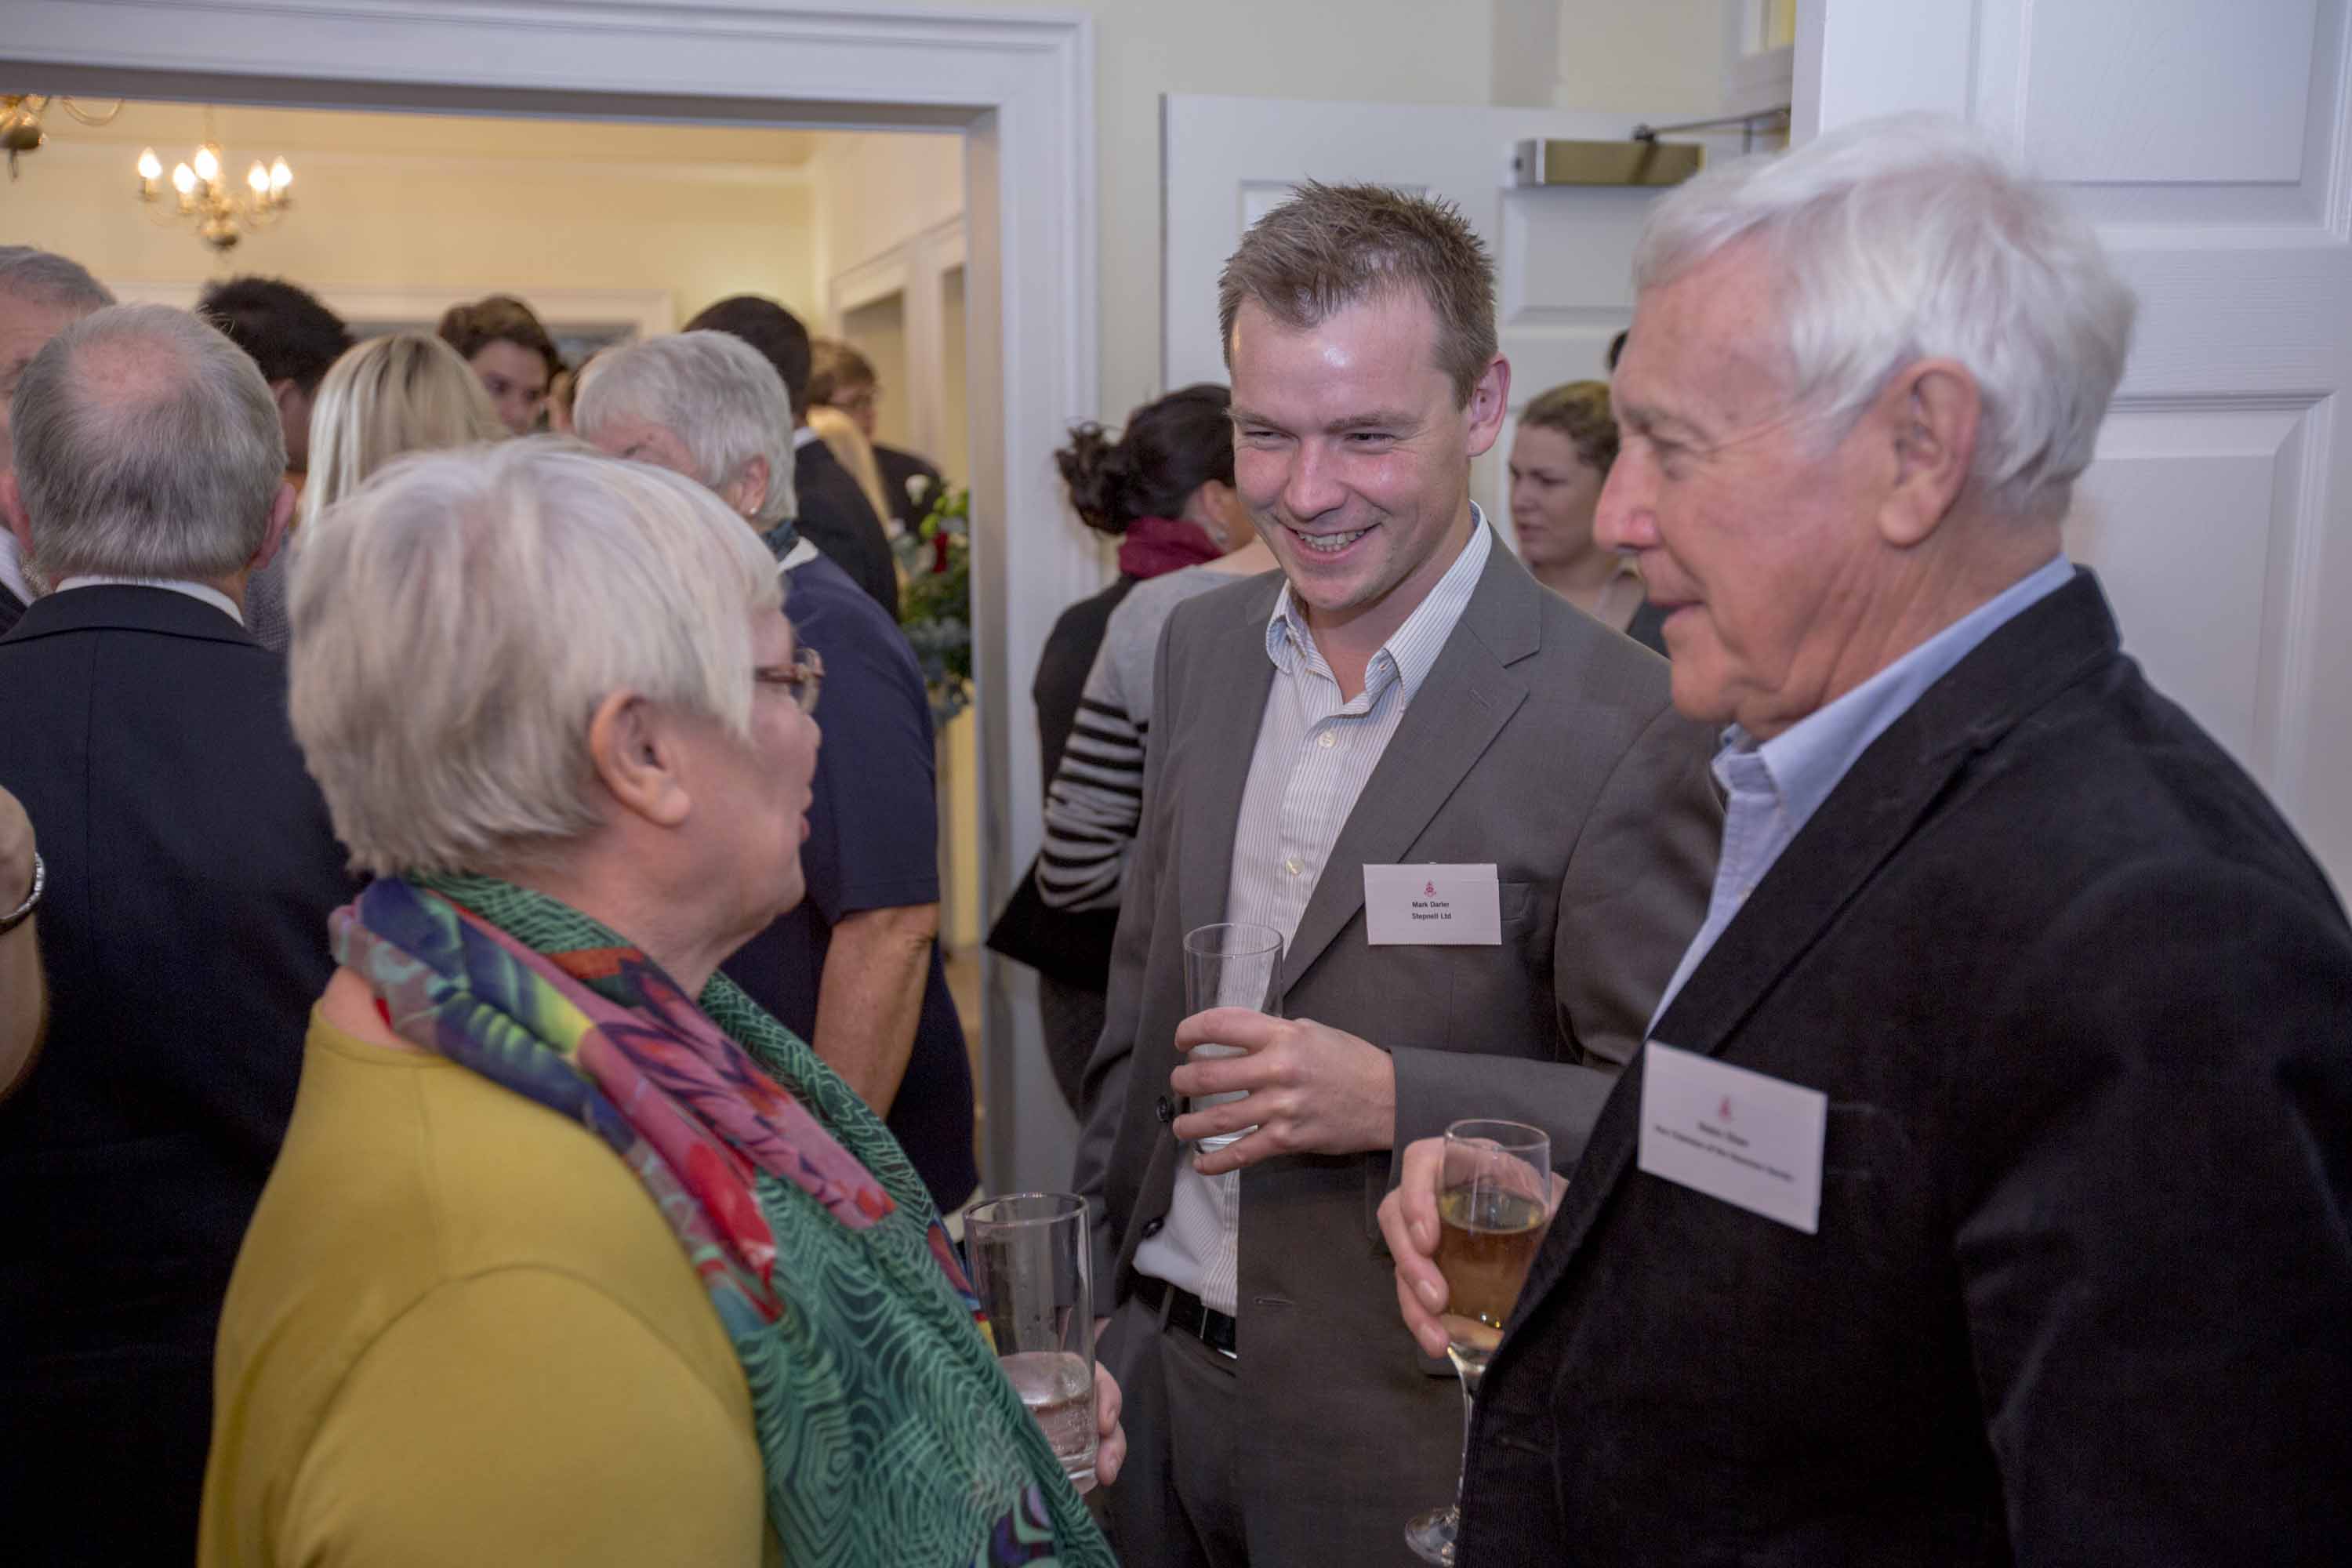 Kate Shaw, Mark Darler (Site Manager, Stepnell Ltd) and Vice-Chairman of the Housmas Society, Robin Shaw - Housman Hall Official Re-Opening, 29th November 2014